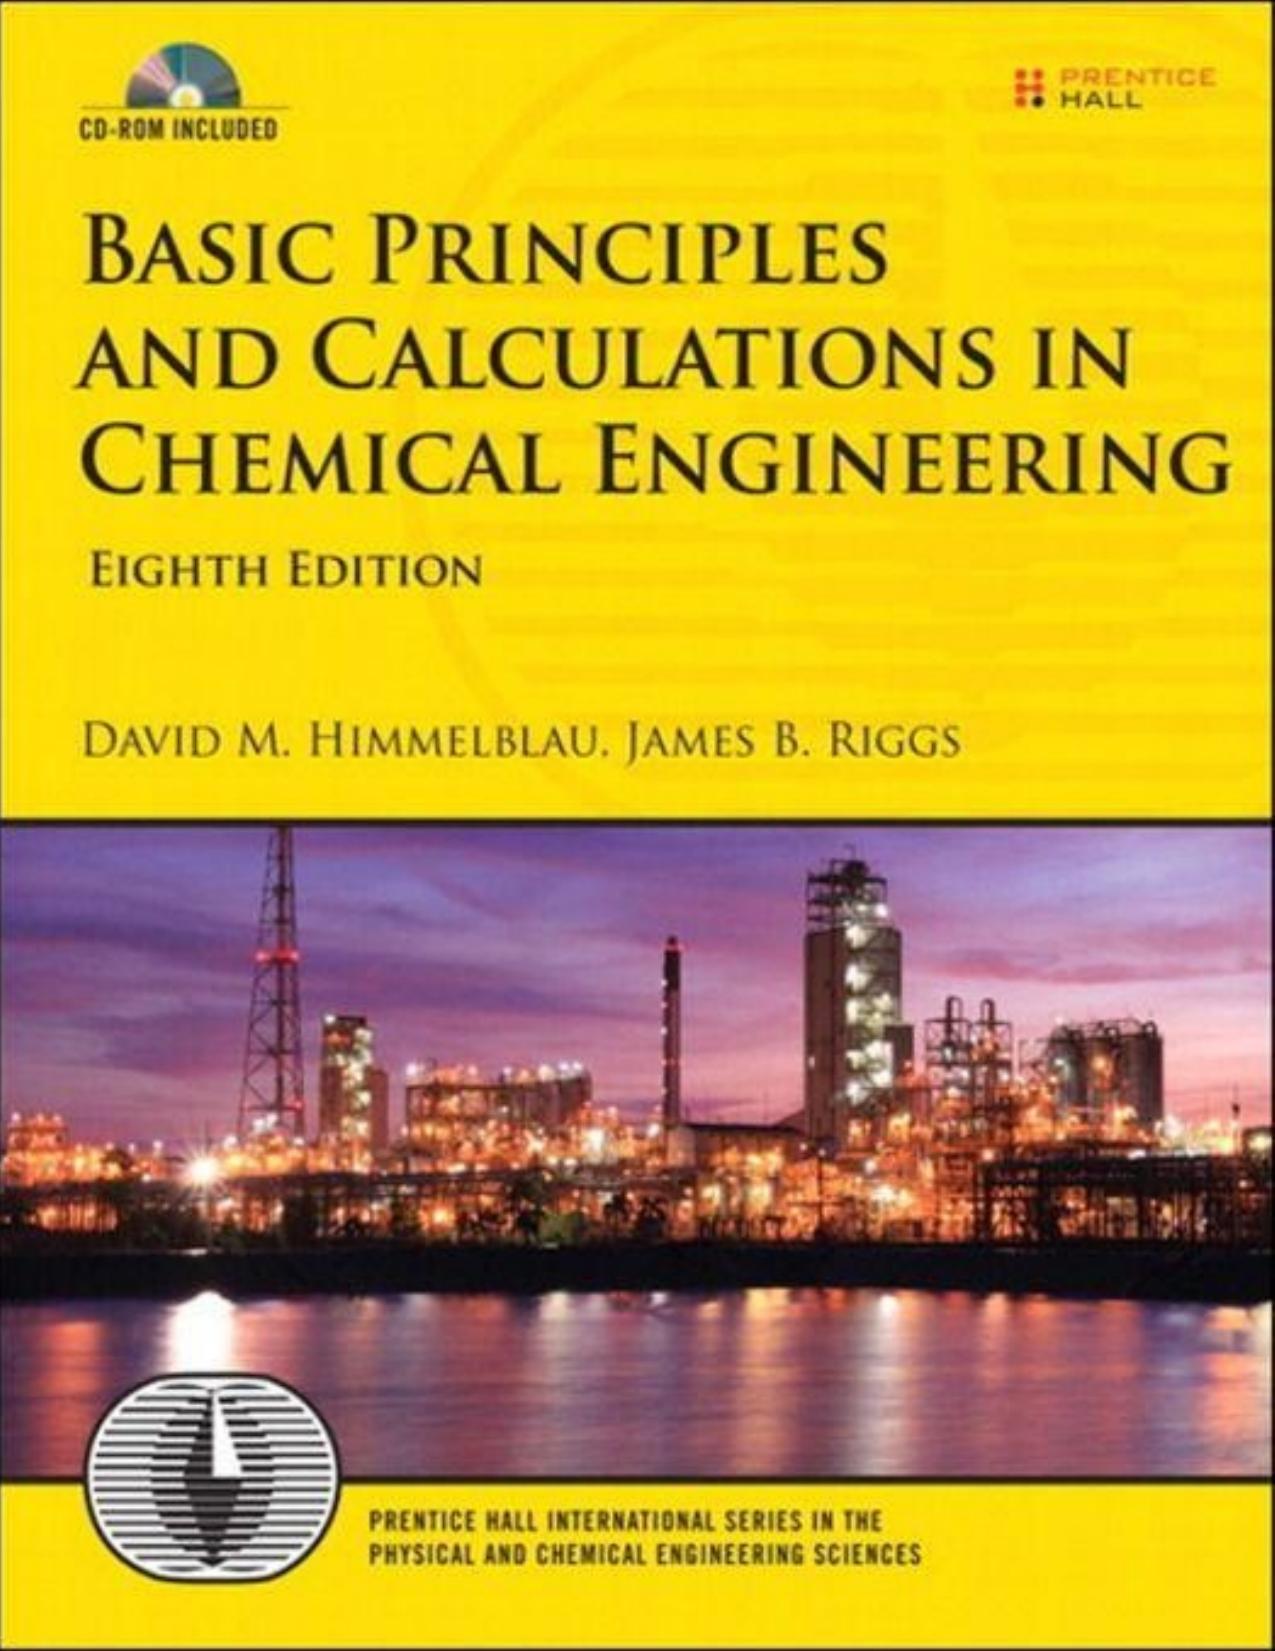 Basic Principles and Calculations in Chemical Engineering (8th Edition) (Prentice Hall International Series in the Physical and Chemical Engineering Sciences)